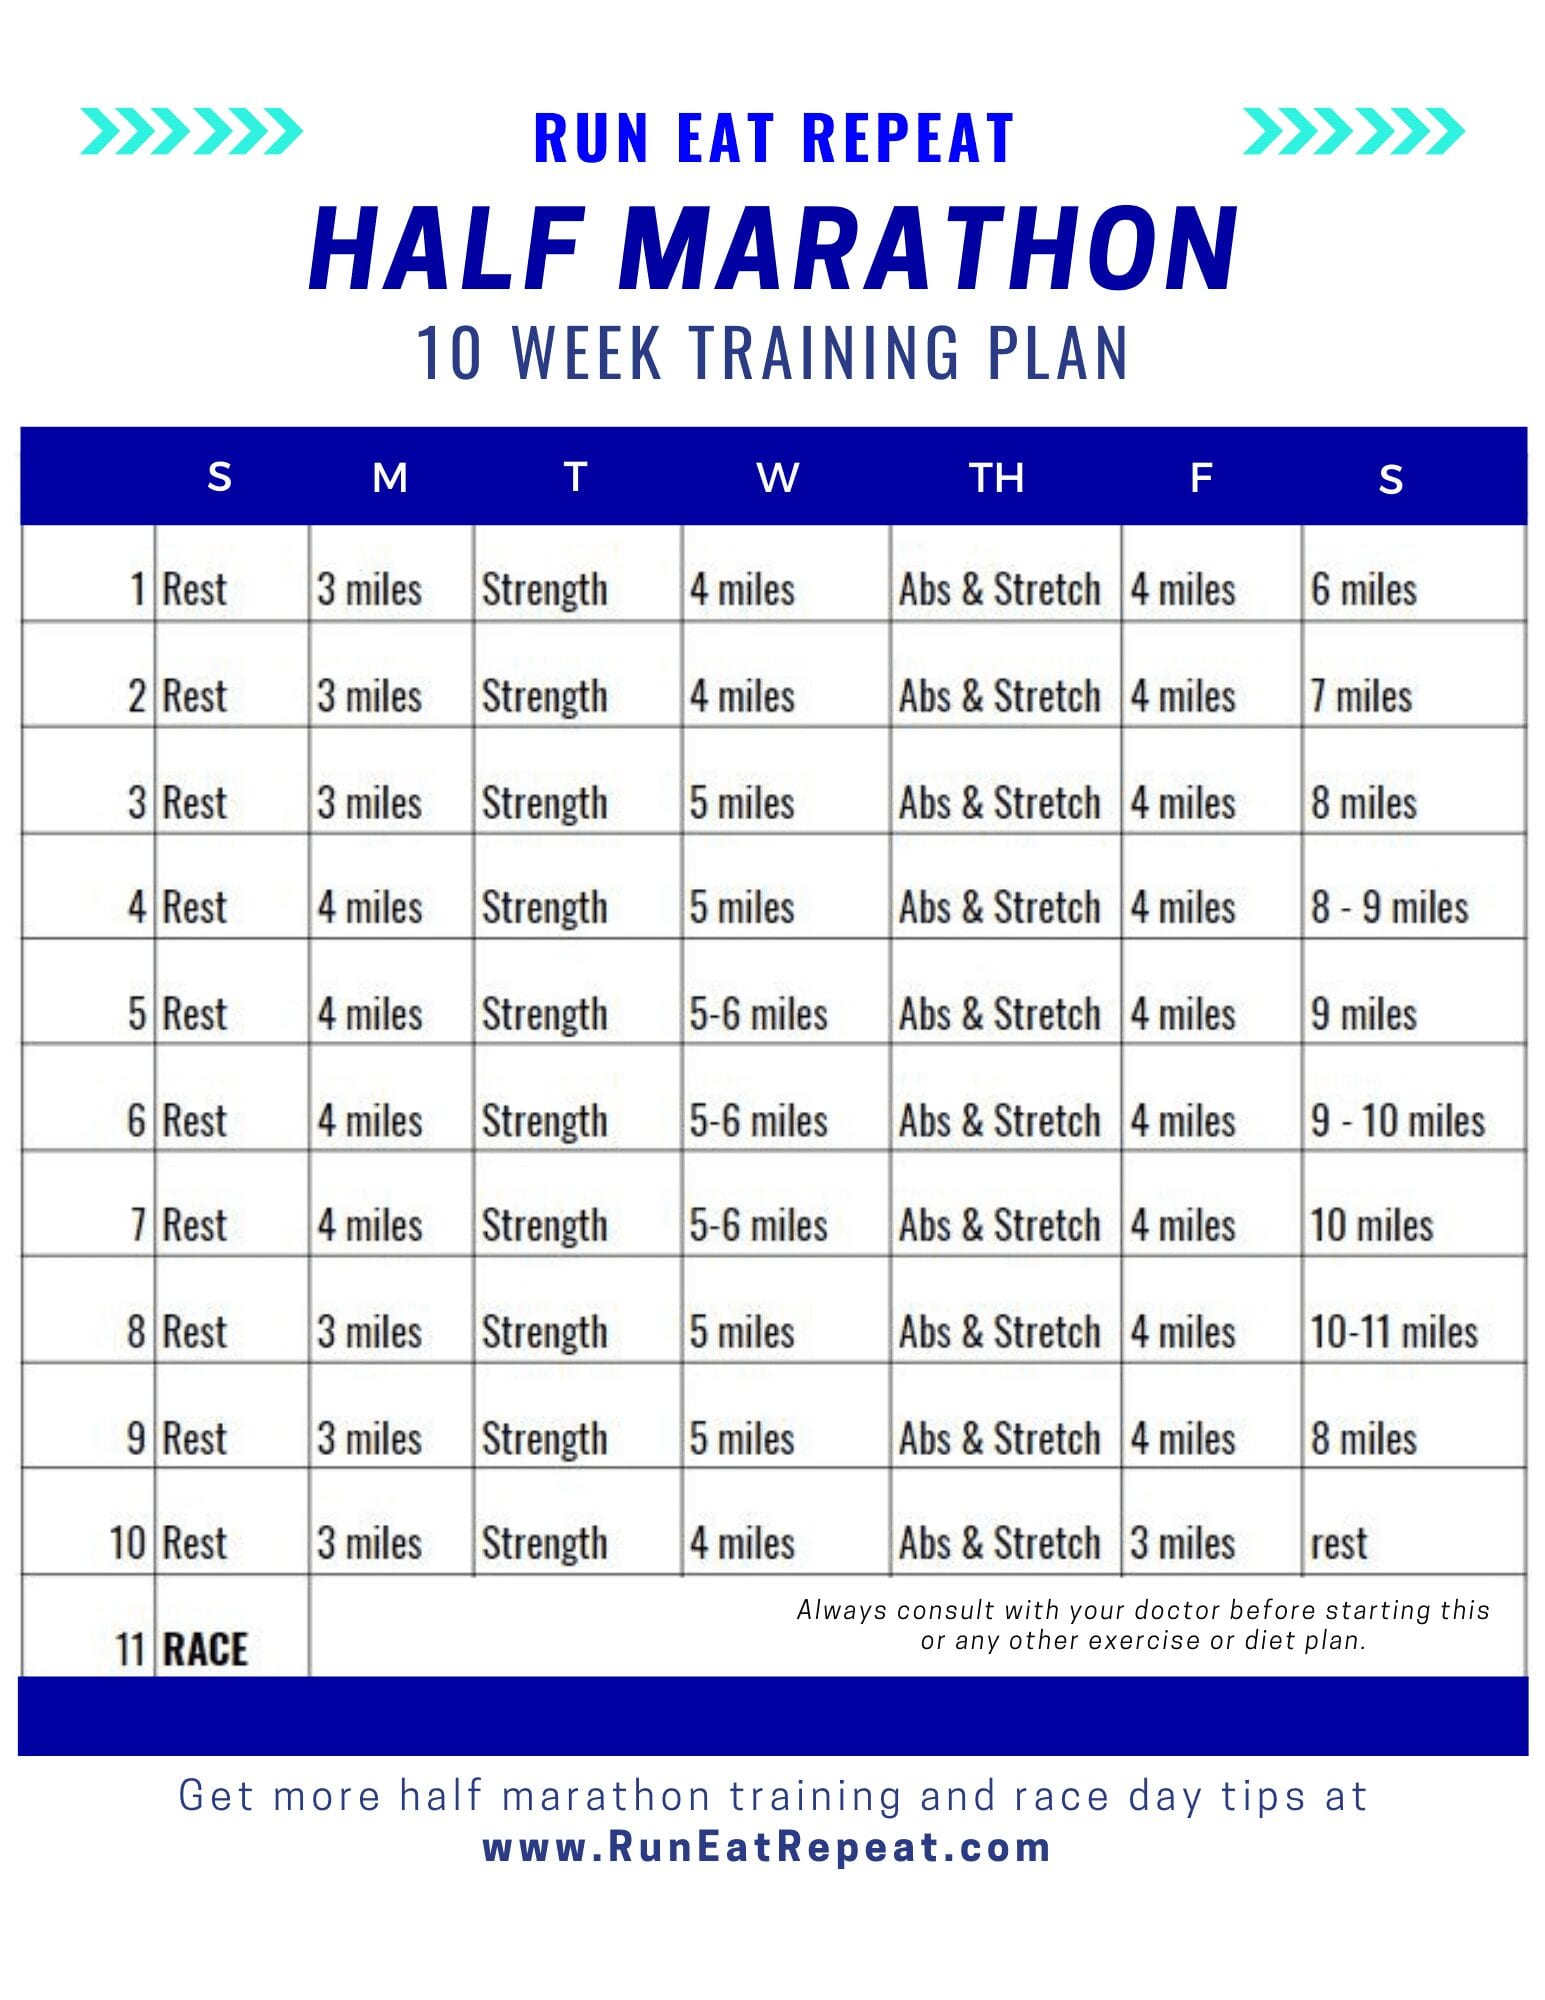 half-marathon-in-10-weeks-training-plan-and-race-packing-list-and-tips